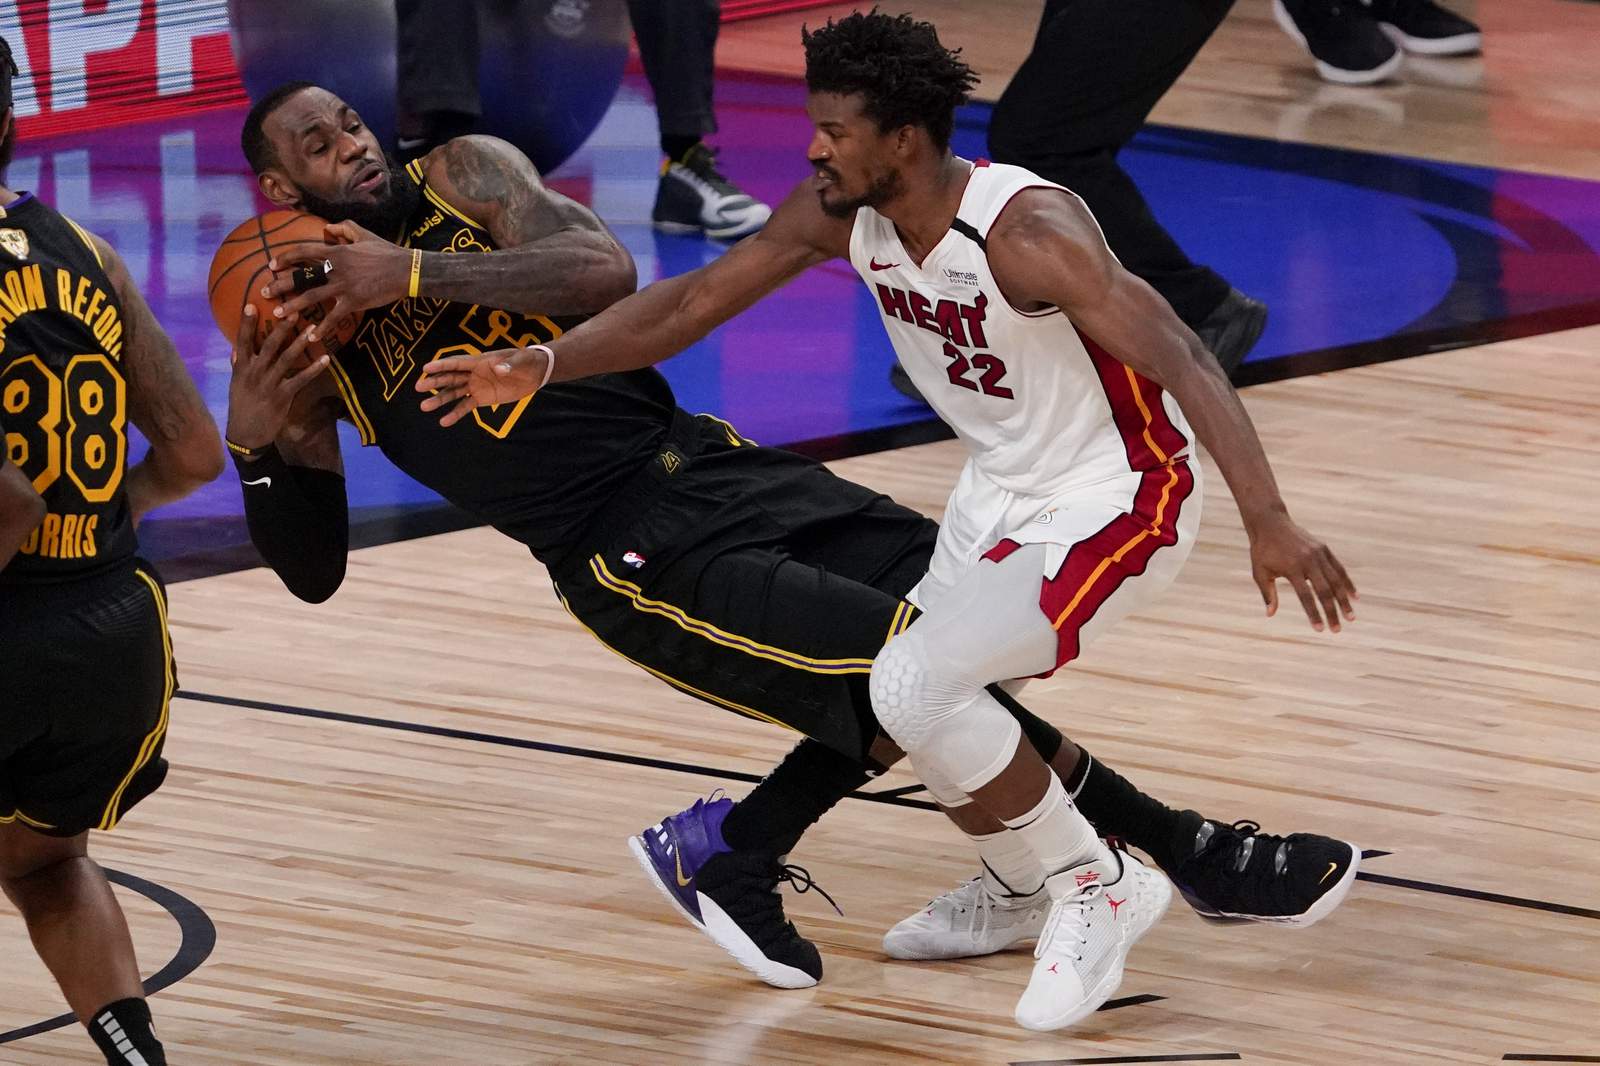 No Lakers coronation yet — Heat stay alive in Game 5 behind another Butler triple-double